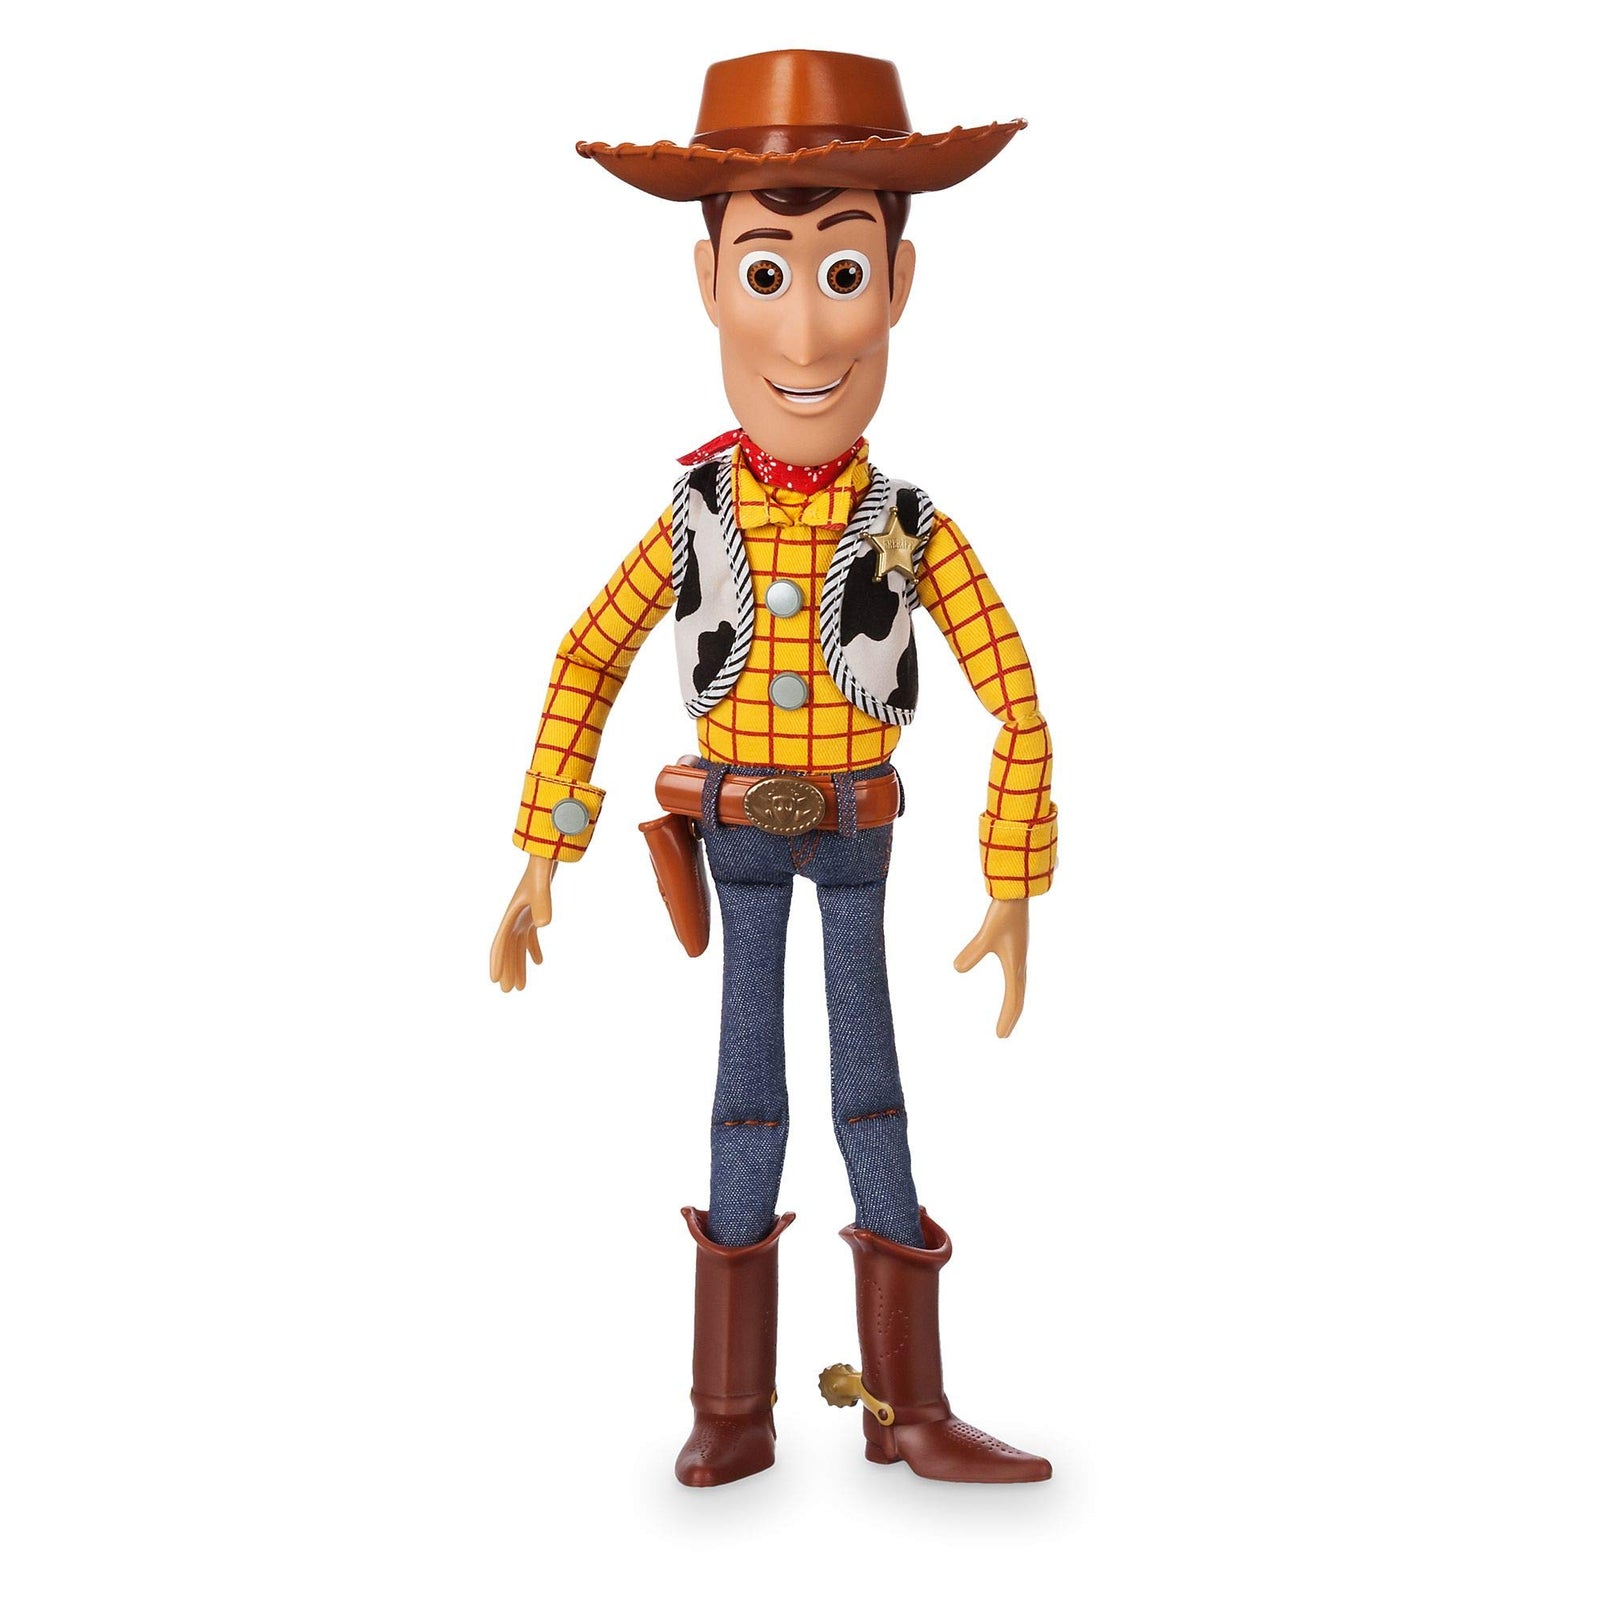 Disney Woody Interactive Talking Action Figure - Toy Story 4 - 15 Inches